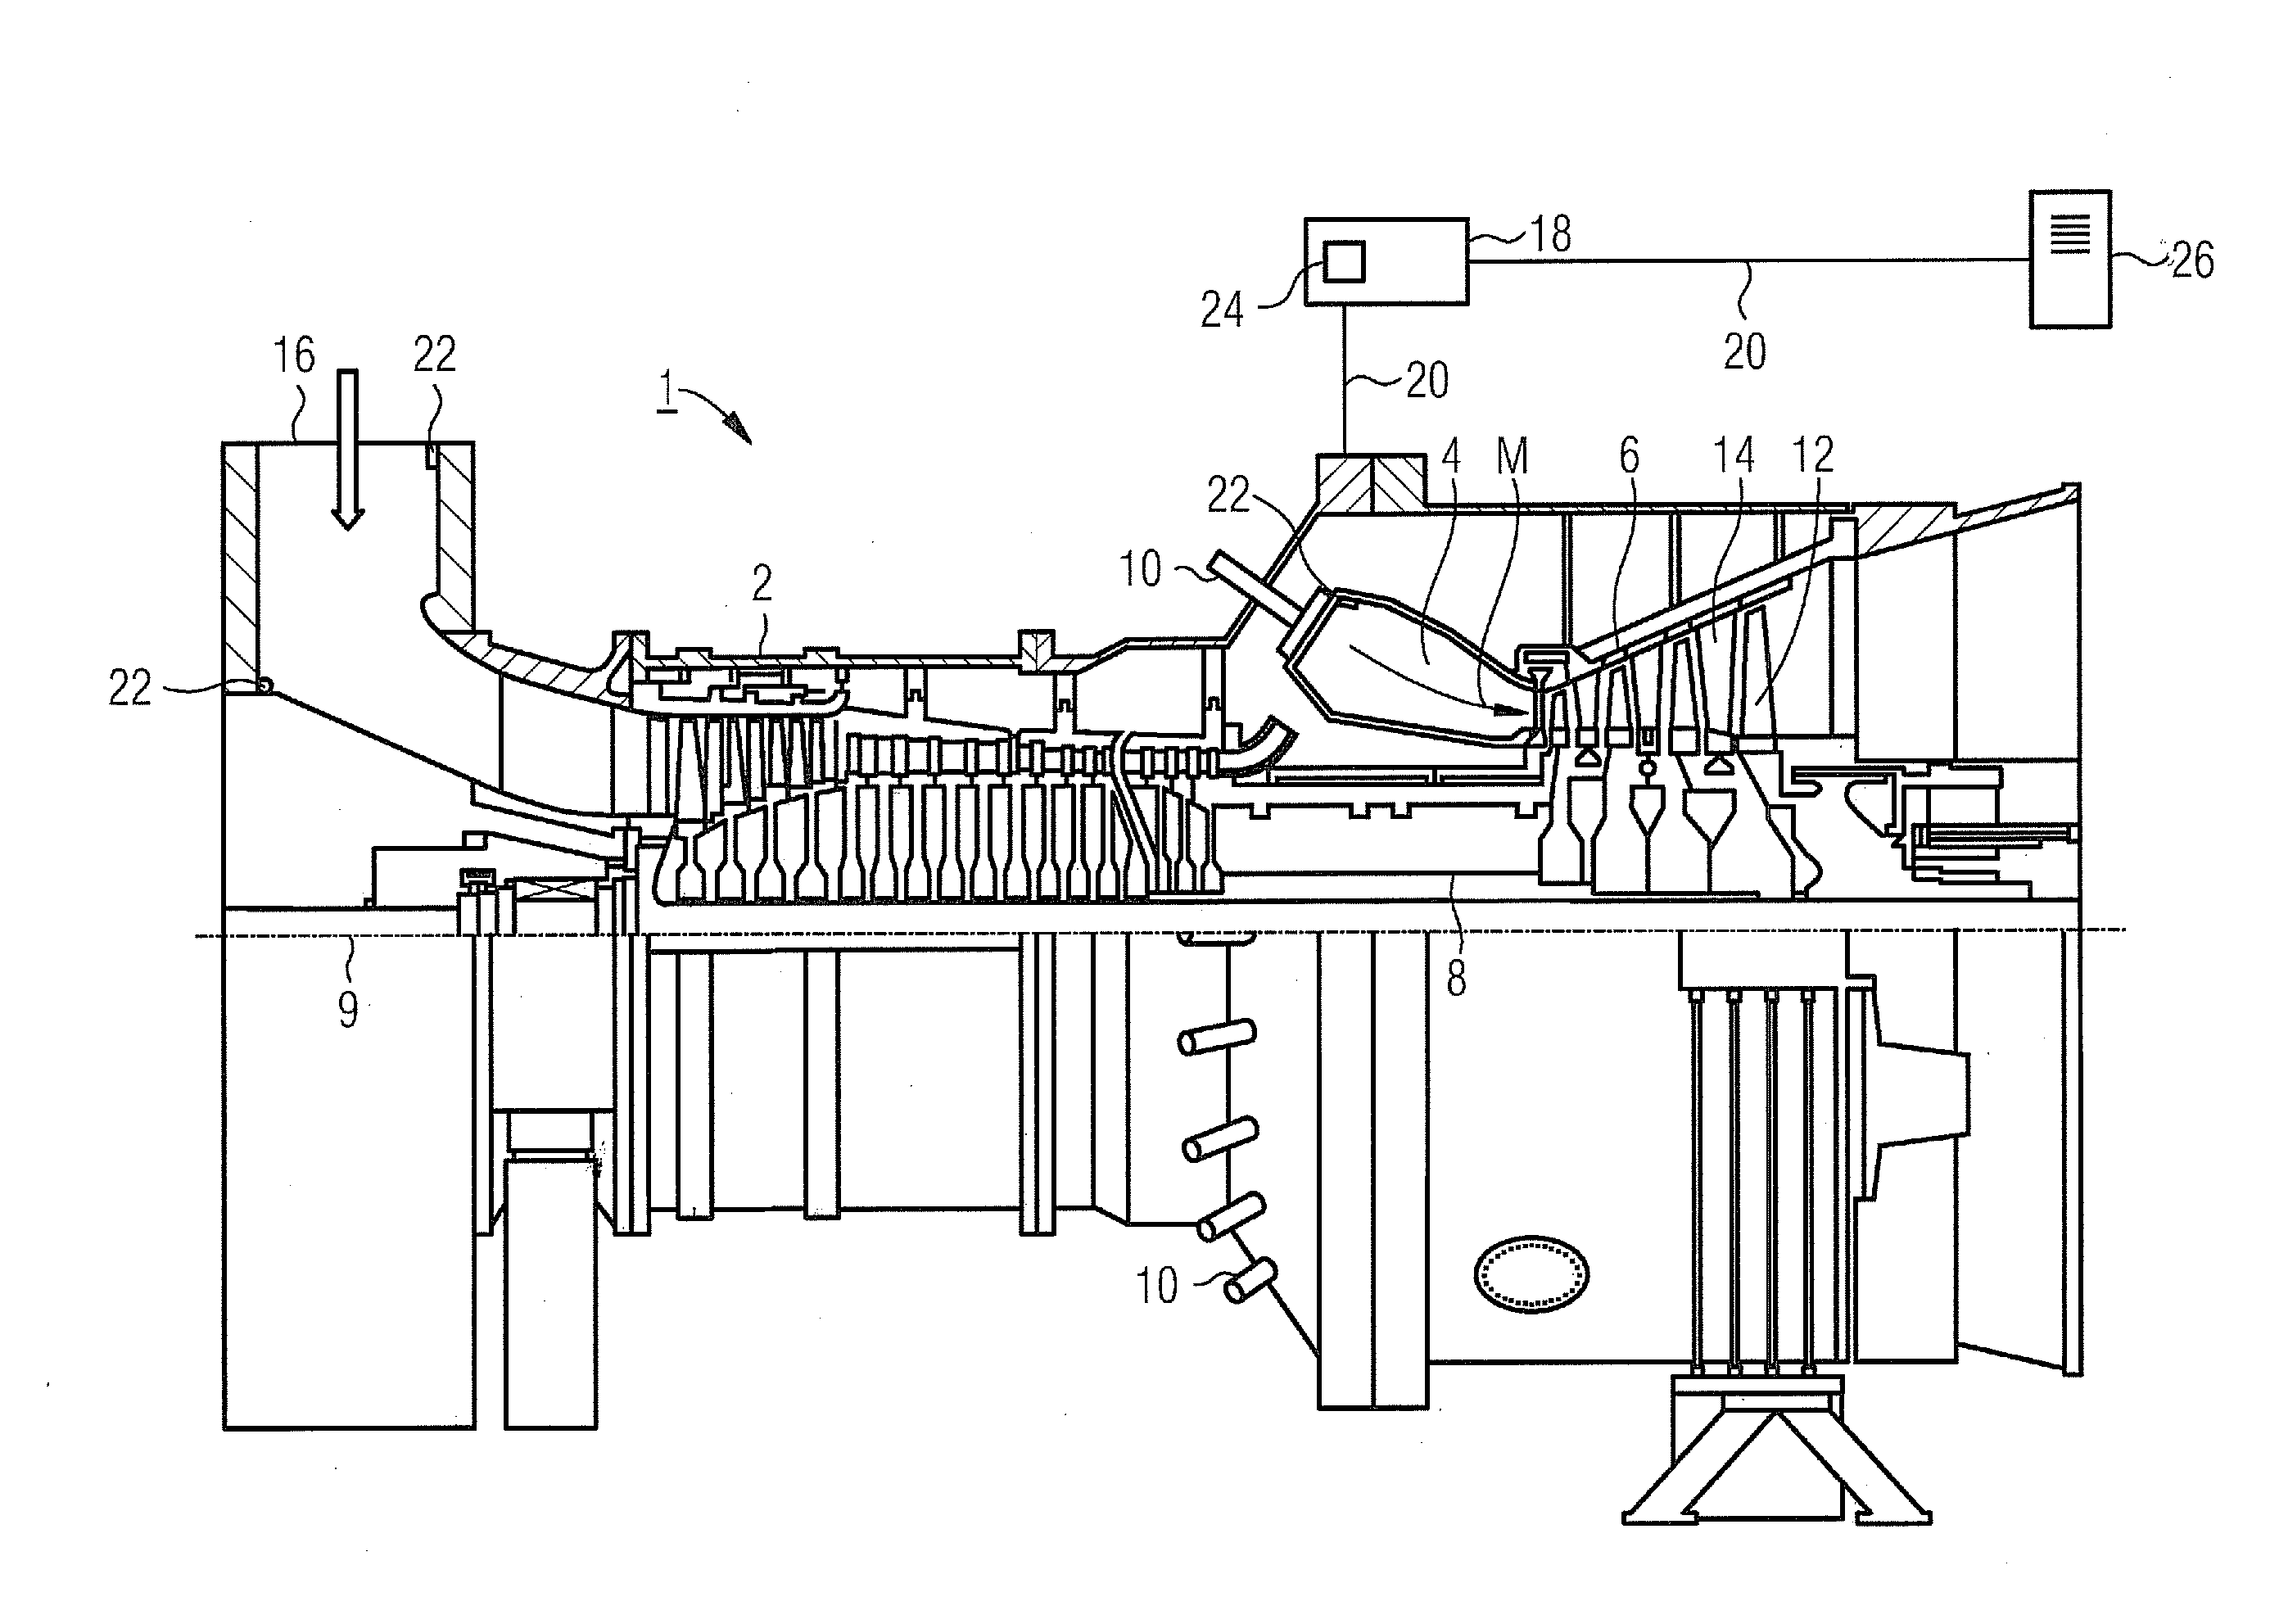 Method for determining the suction mass flow of a gas turbine